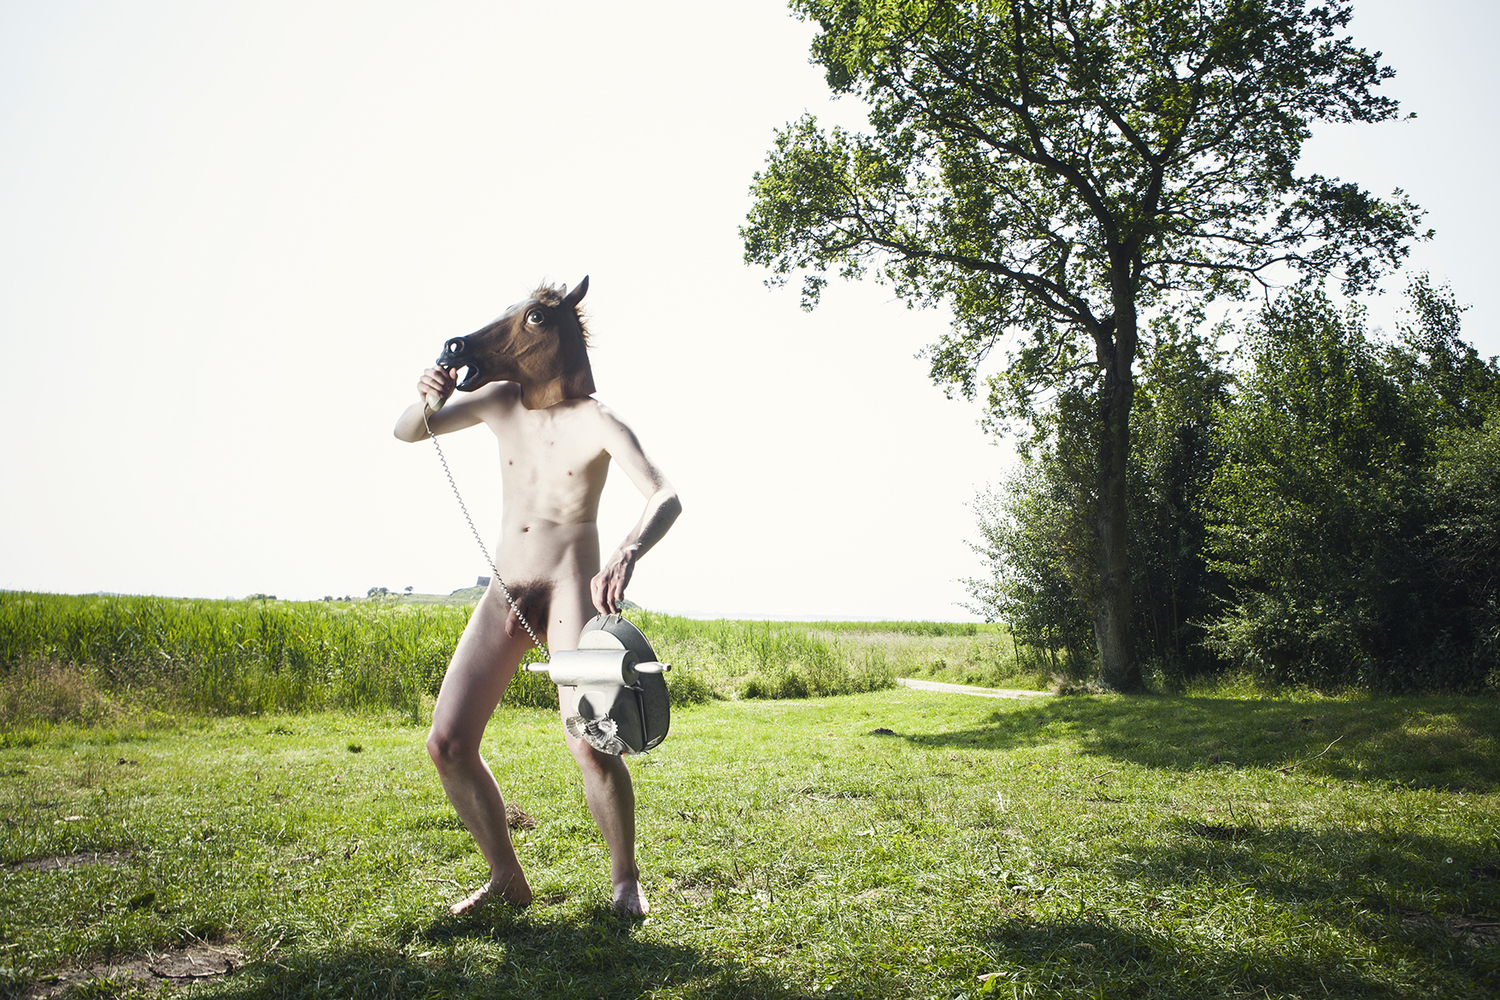 Knaldemand is standing in a small field under a tree, holding a toy rotary phone, calling Dog.